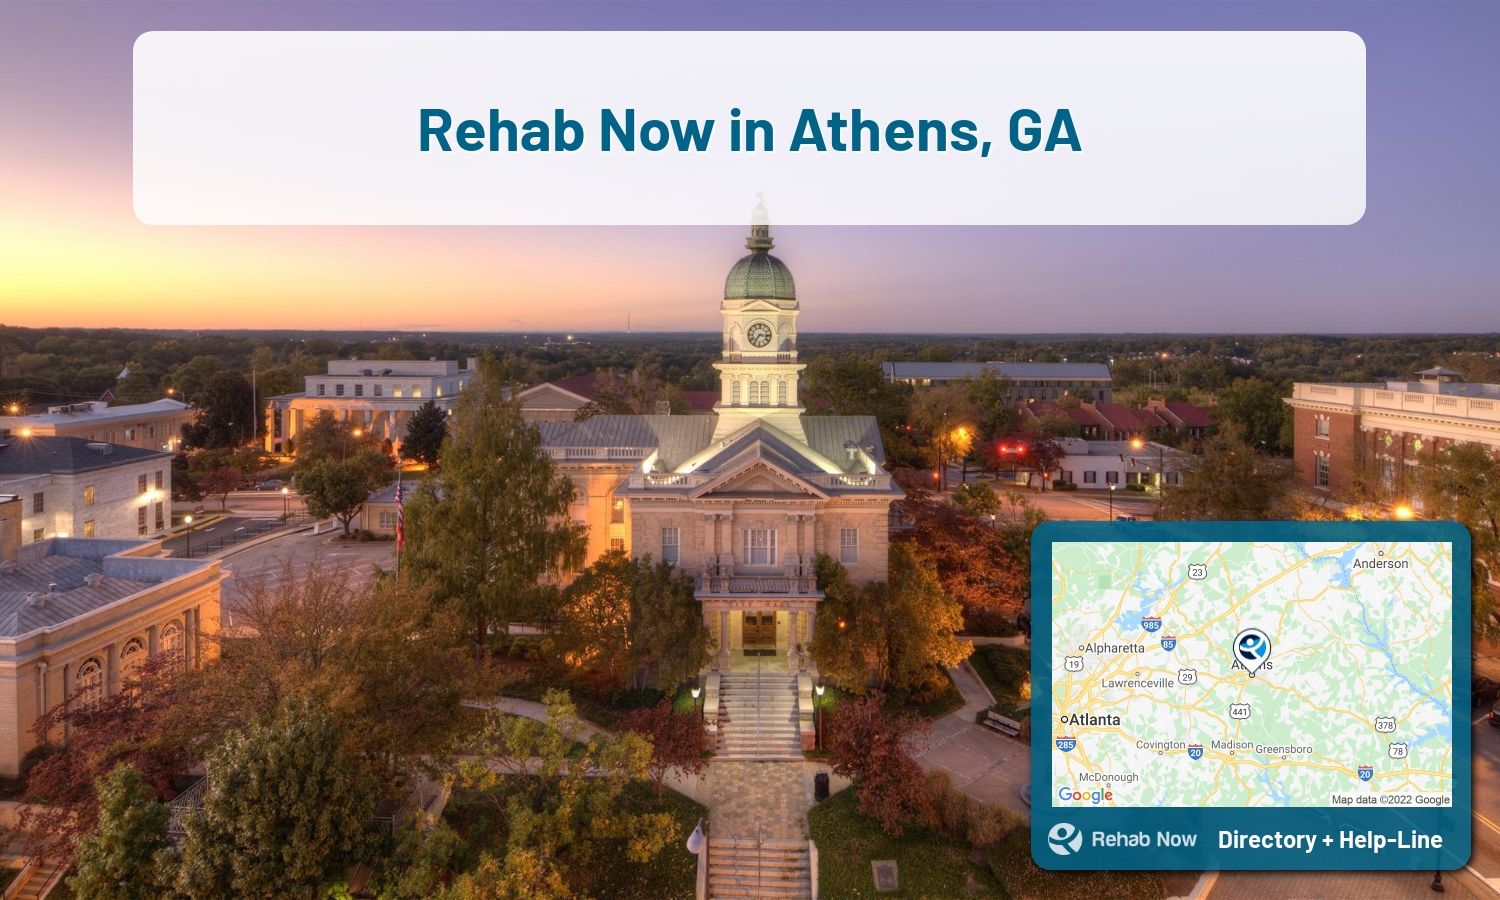 Drug rehab and alcohol treatment services near you in Athens, Georgia. Need help choosing a center? Call us, free.